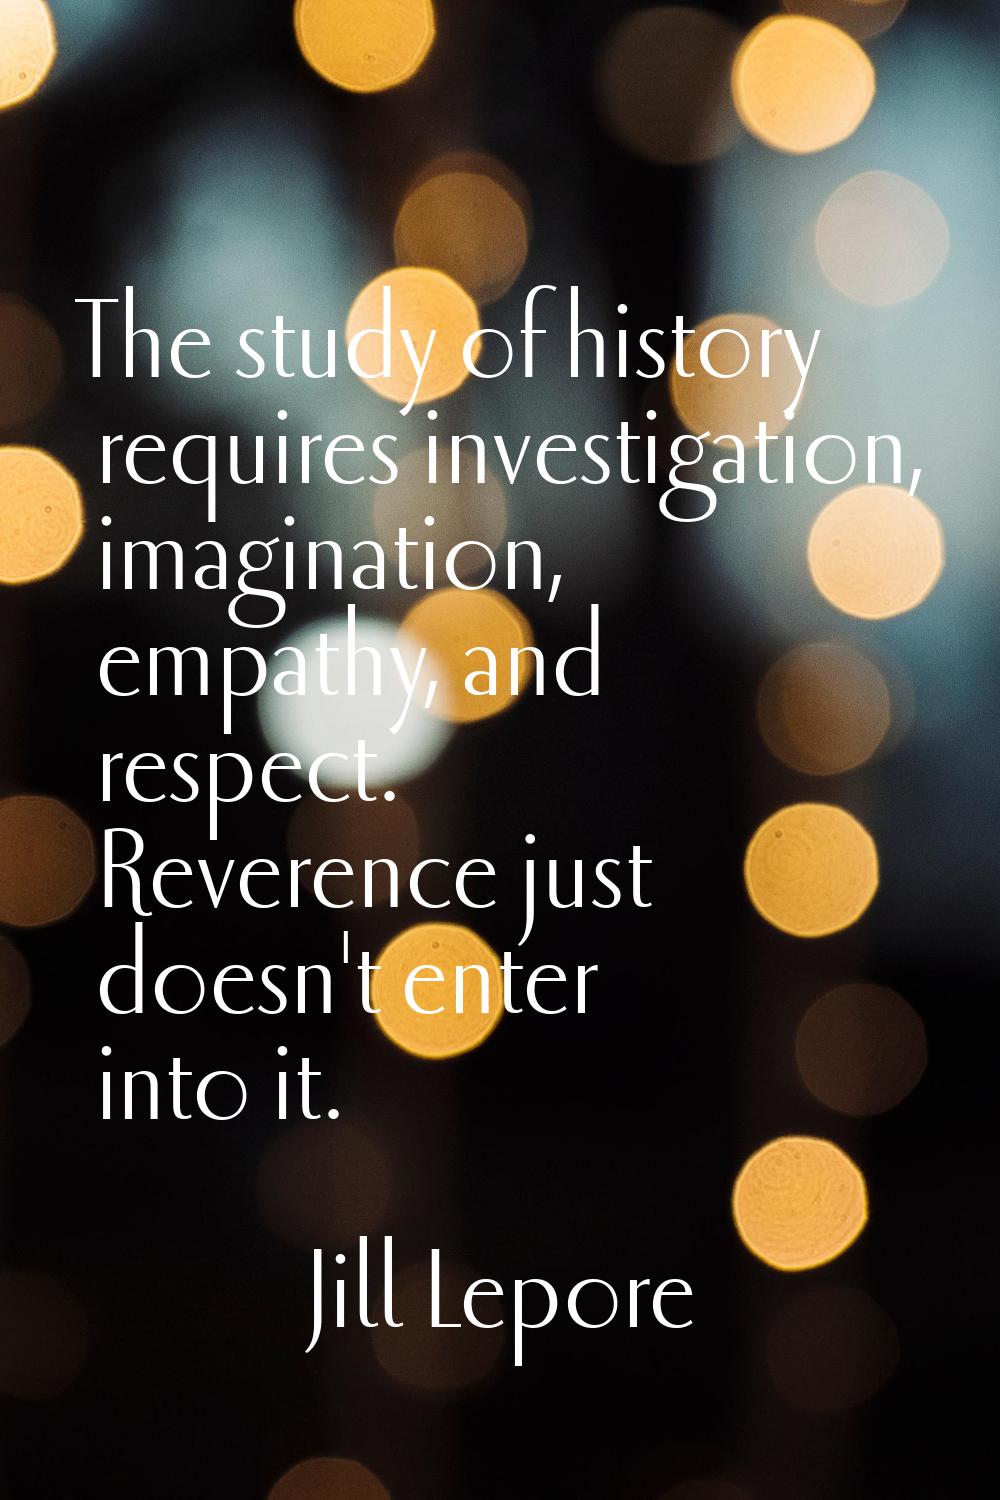 The study of history requires investigation, imagination, empathy, and respect. Reverence just does